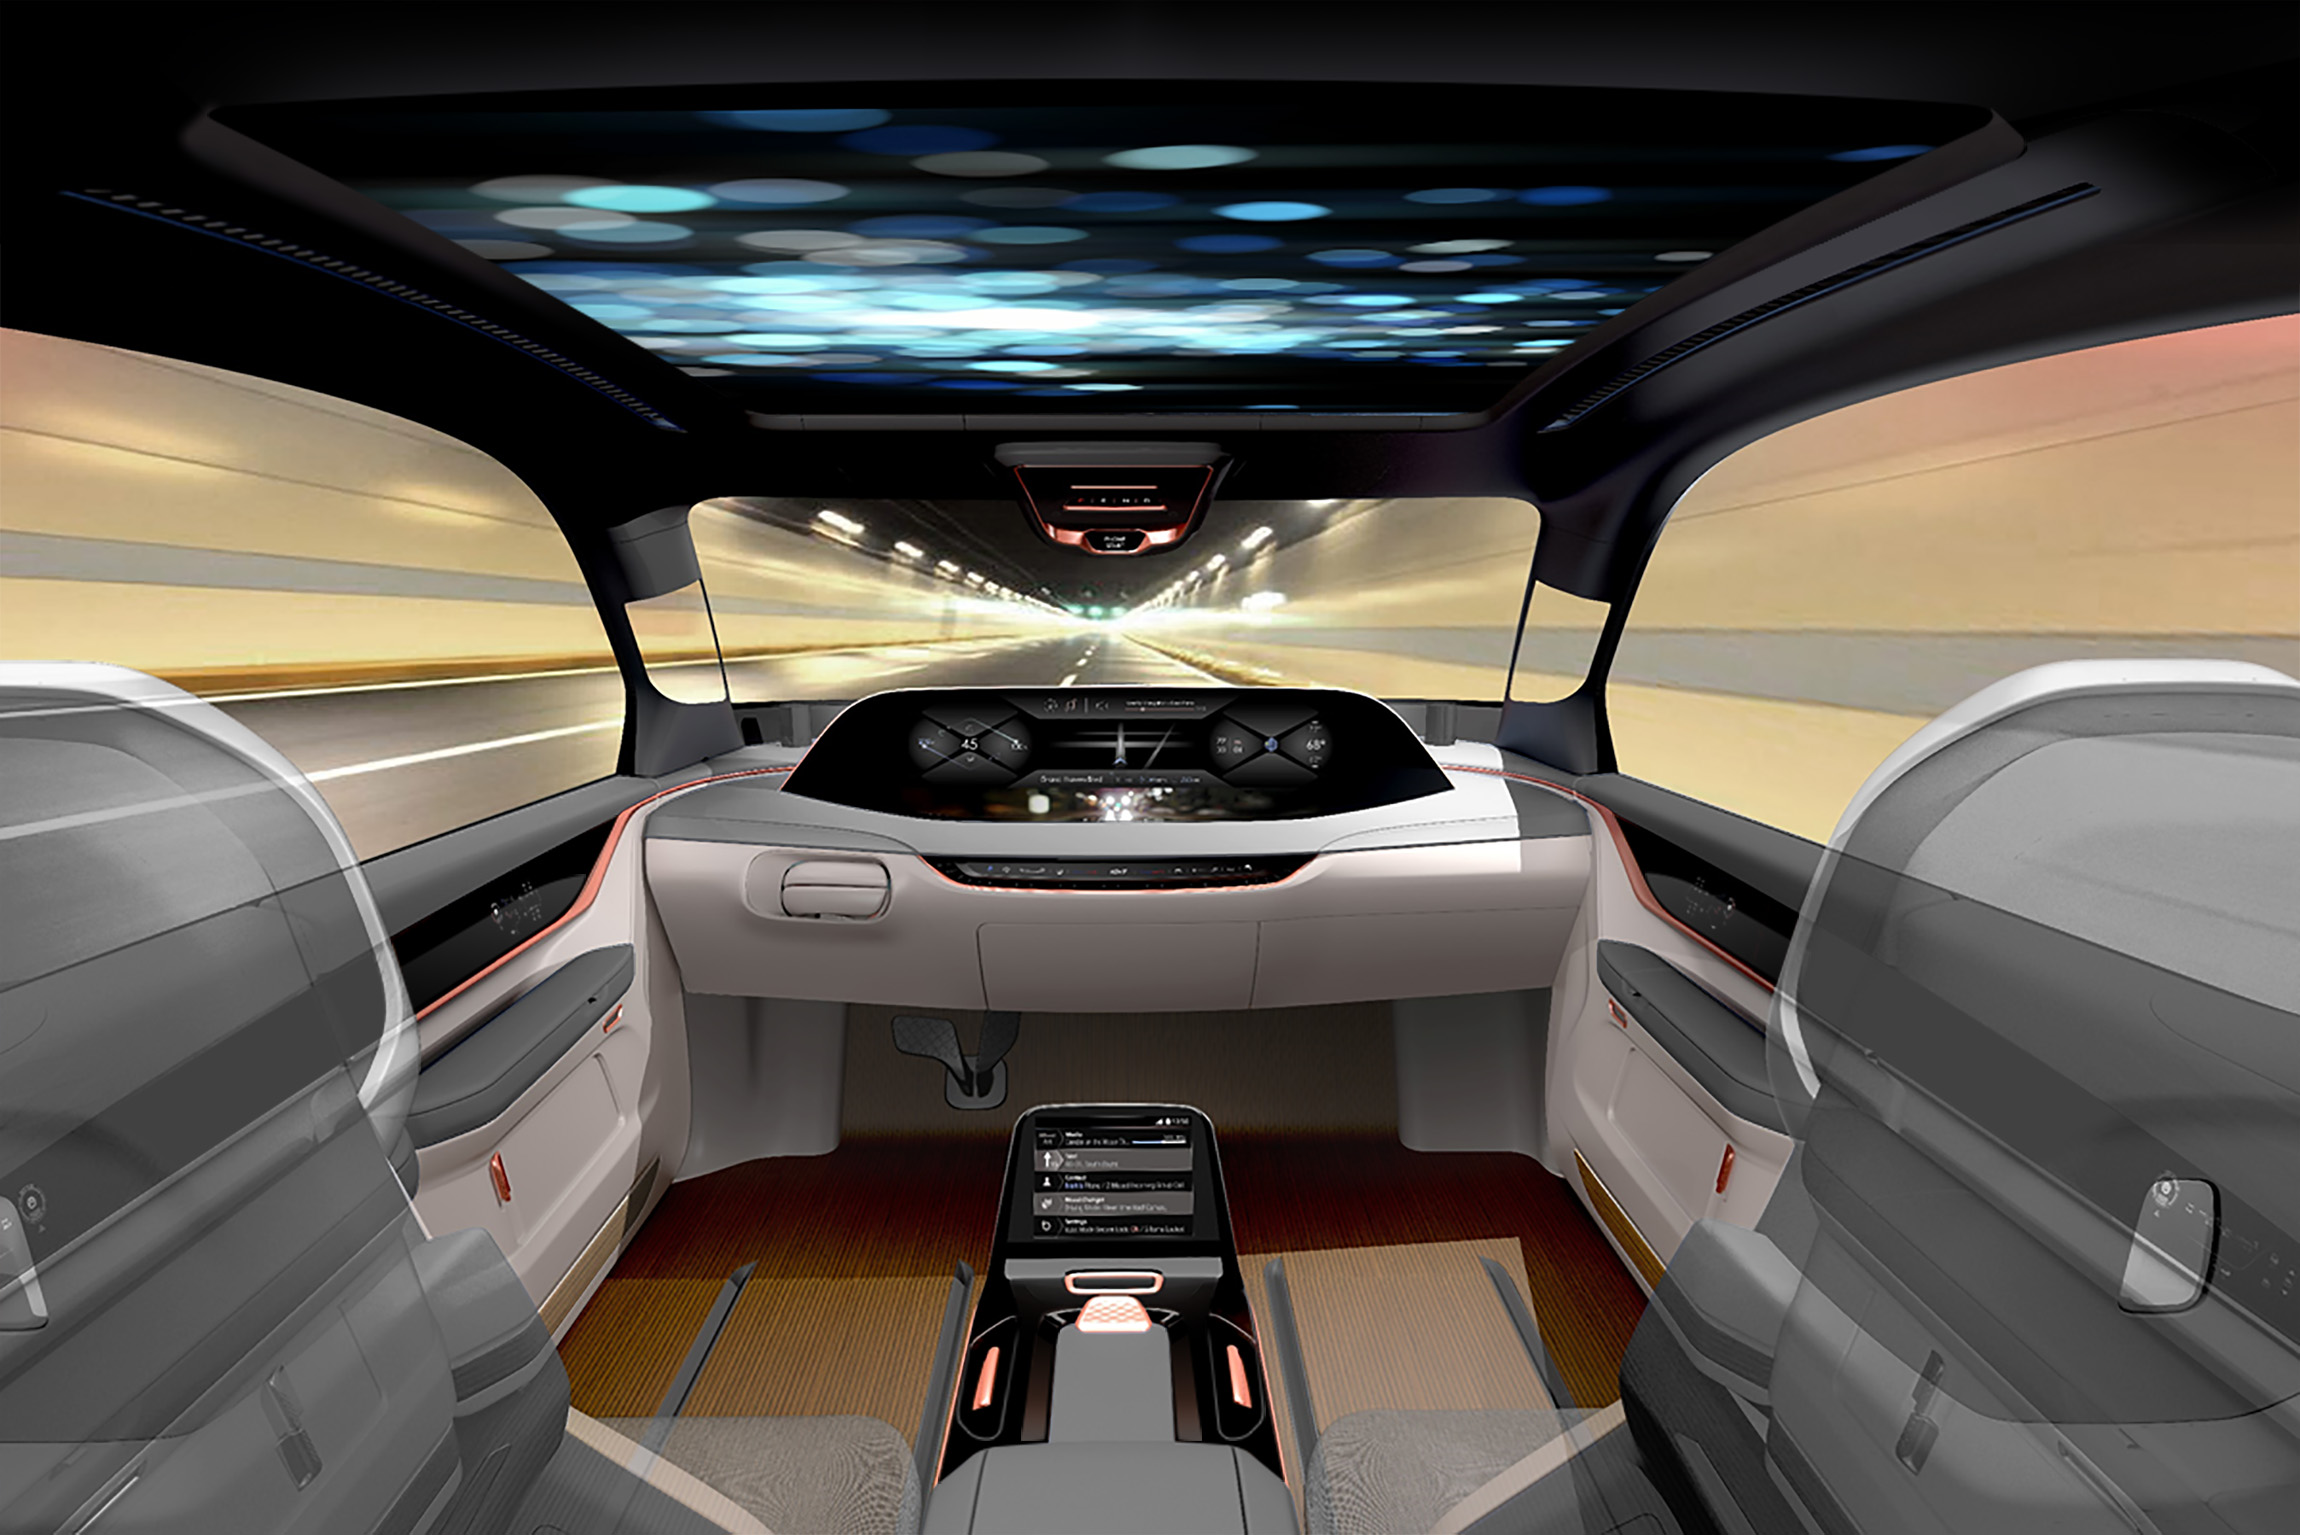 Yanfeng to Unveil New Interiors Concept at IAA